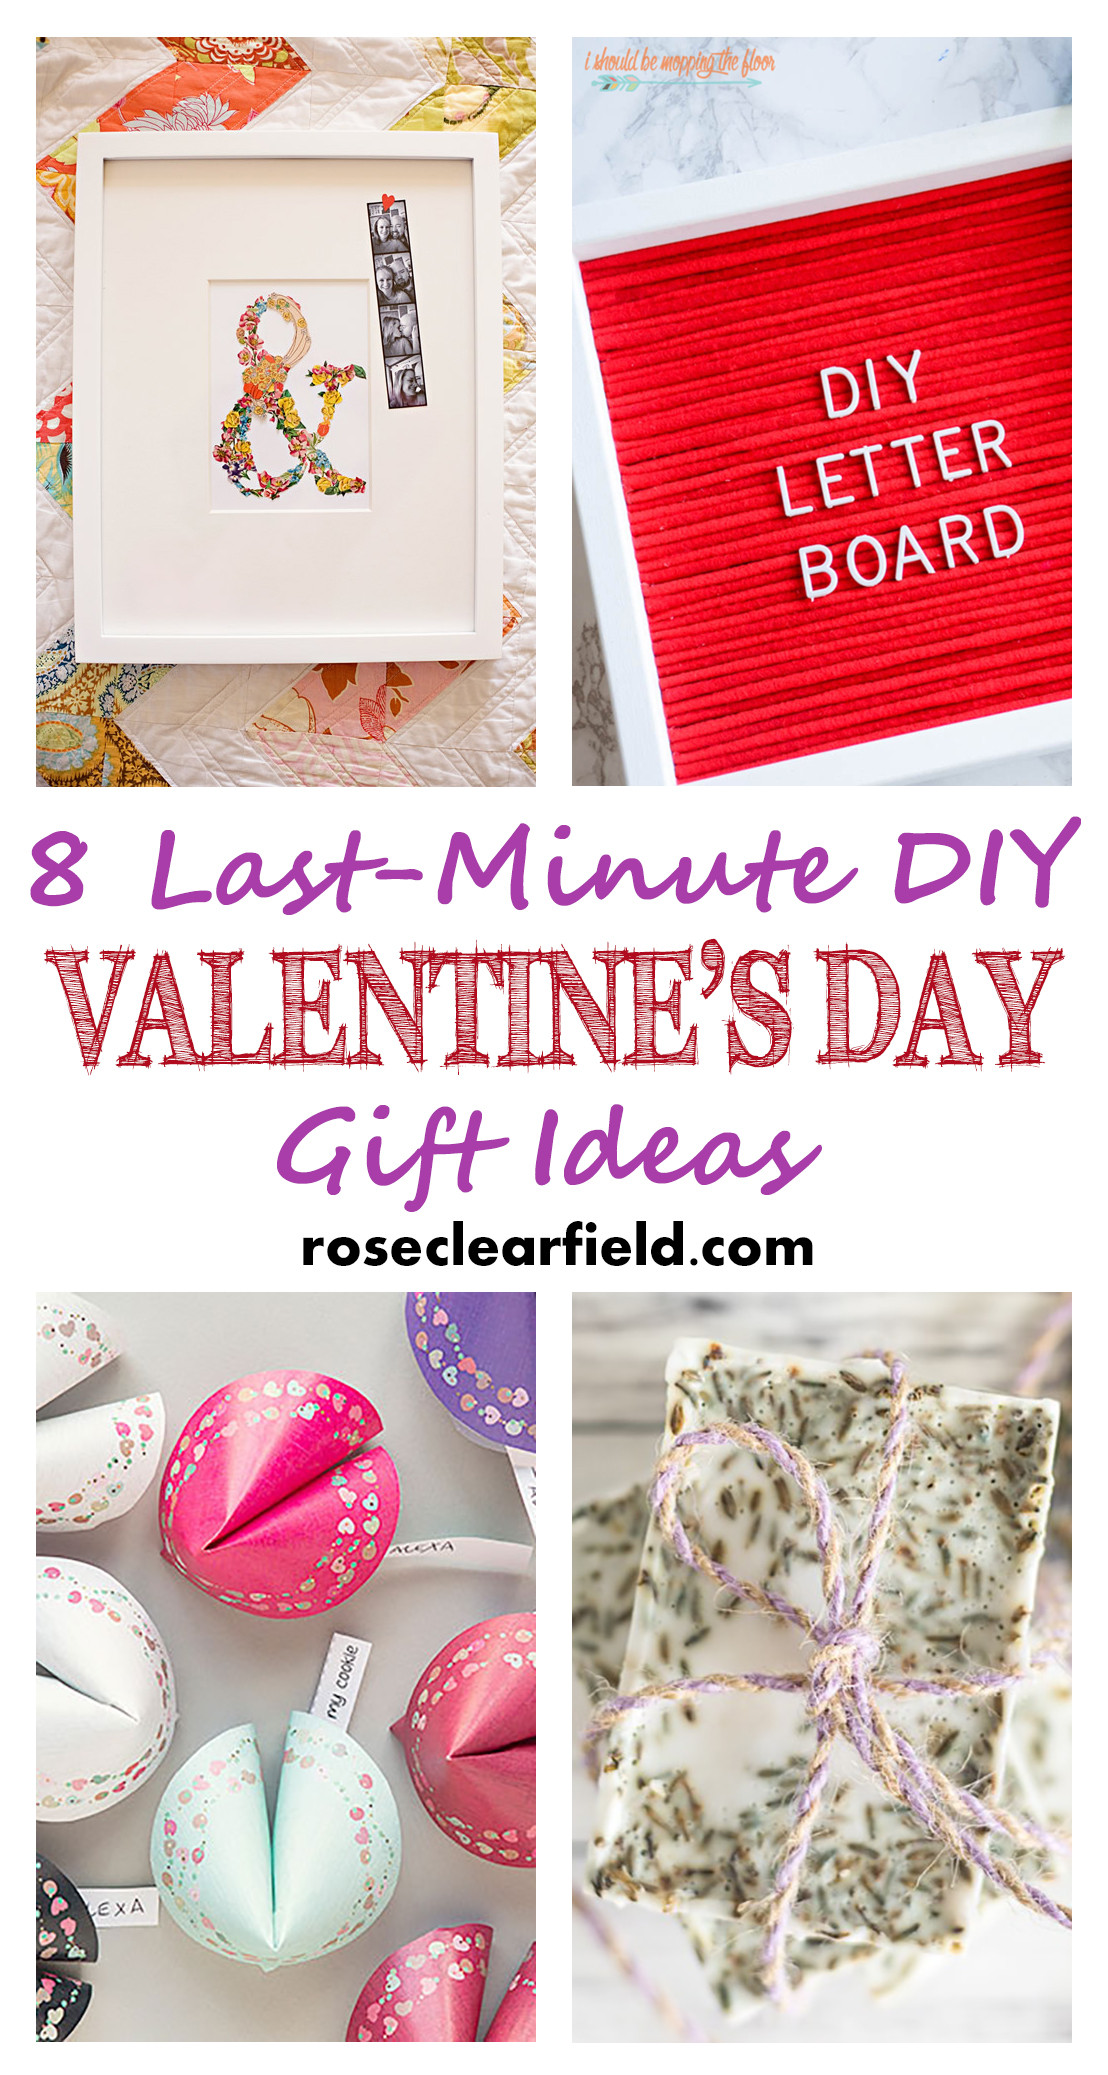 Last Minute Valentines Day Ideas
 Last Minute DIY Valentine s Day Gift Ideas • Rose Clearfield